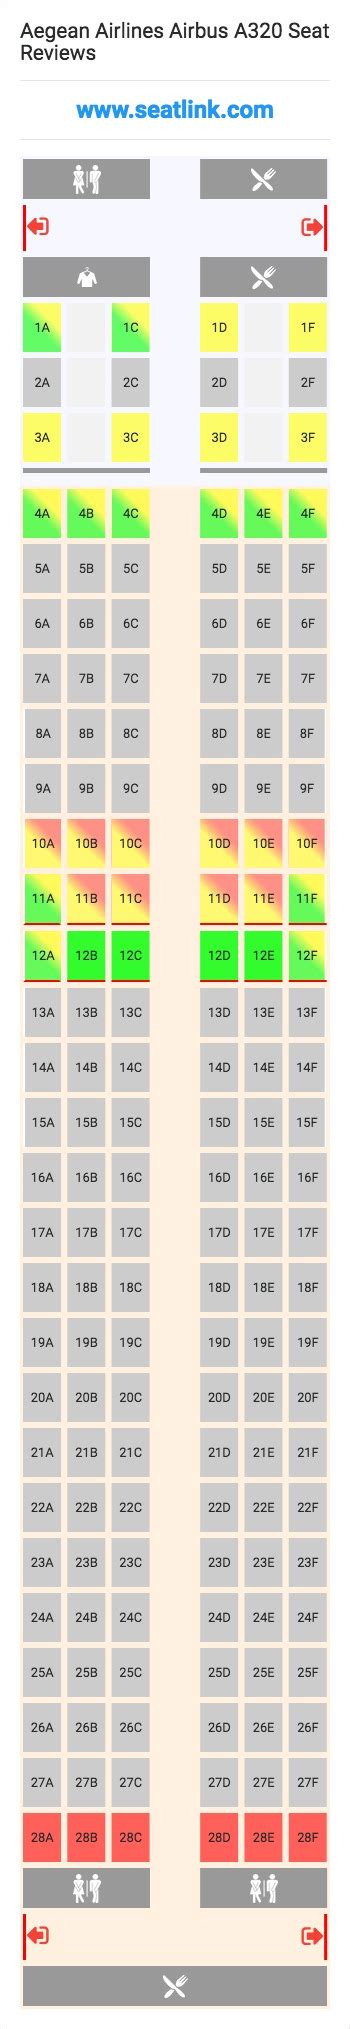 Aegean Airlines Airbus A320 Seating Chart Updated January 2020 Seatlink